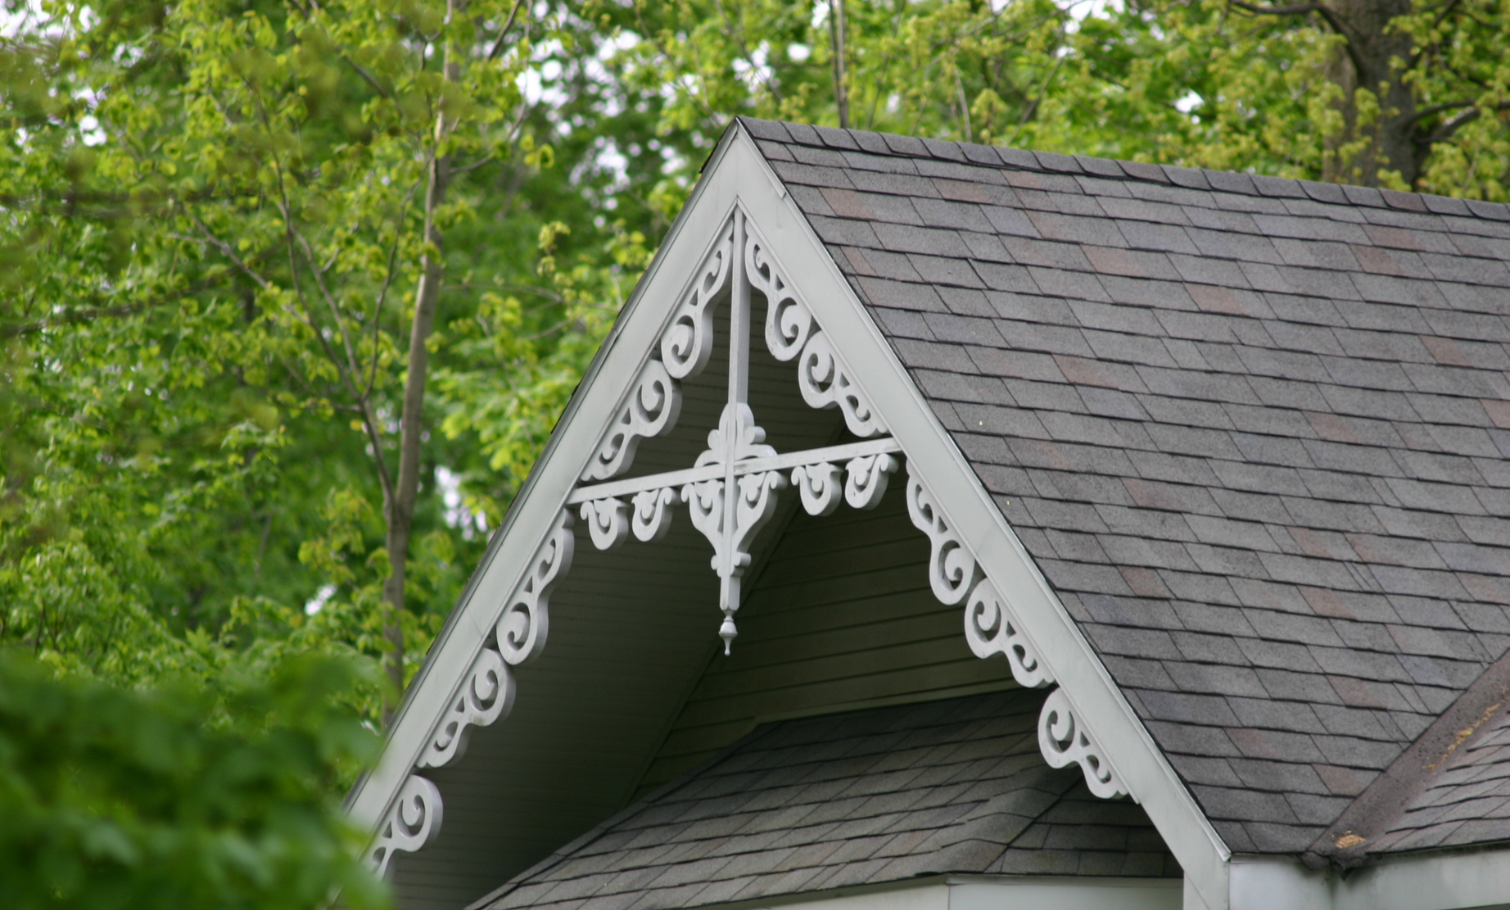 This close-up image shows a home’s gingerbread-style gable decoration.